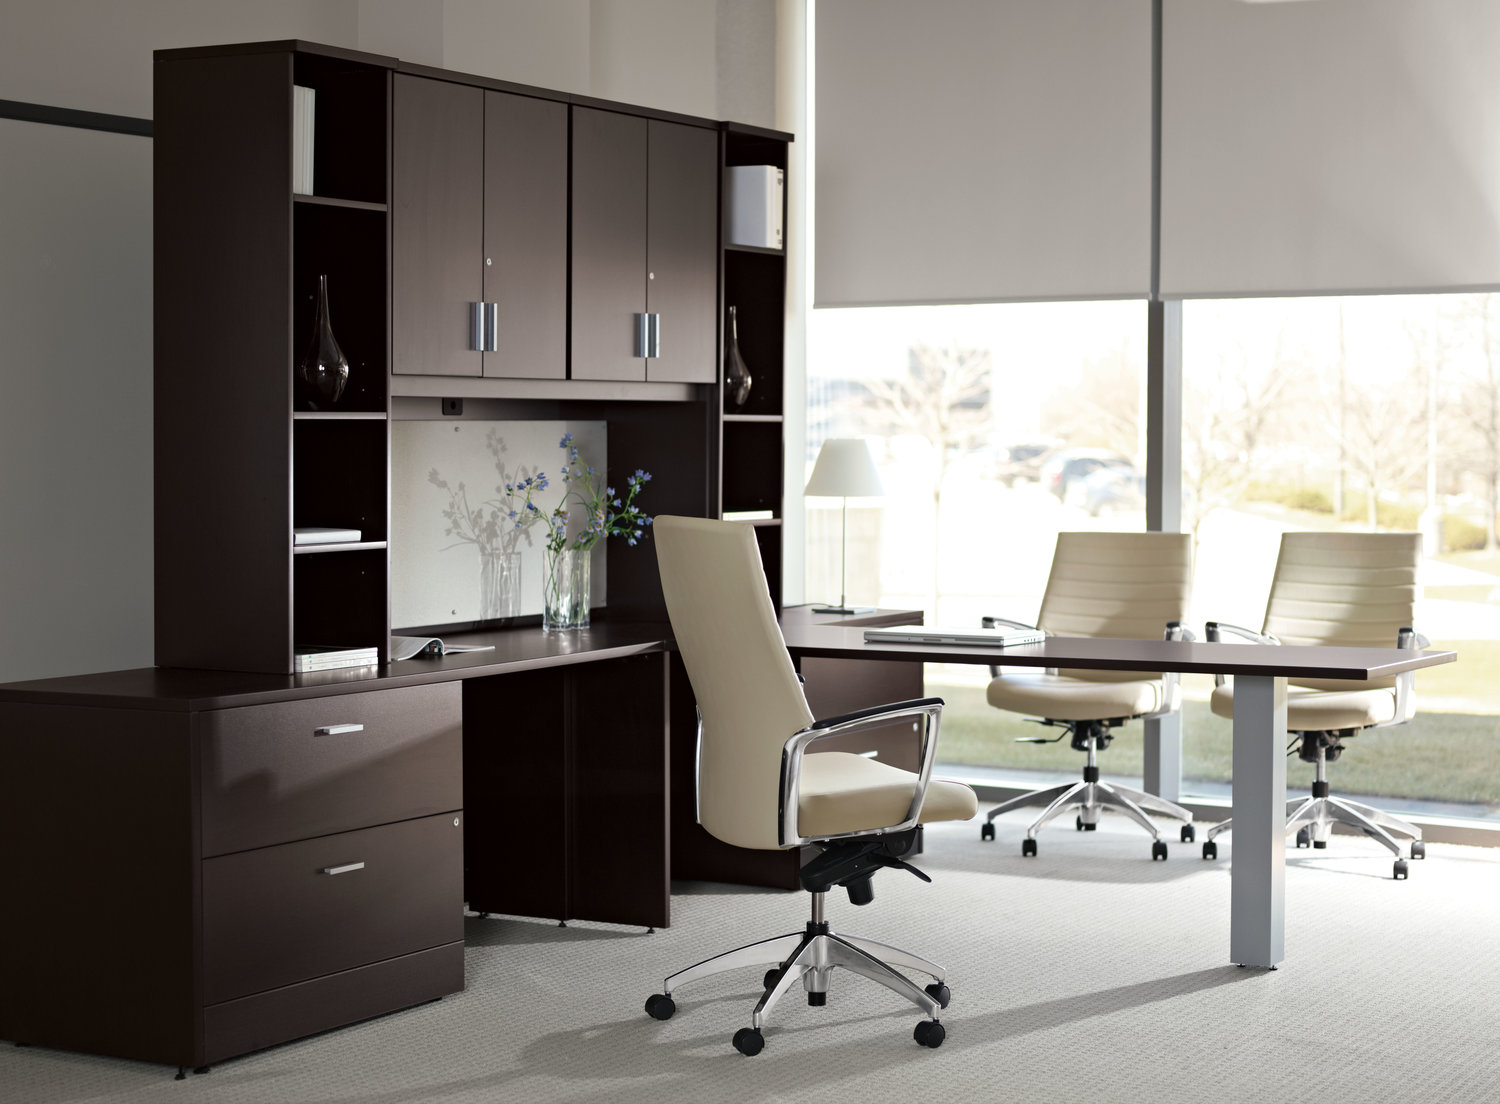 New & Used Office Furniture - Knoxville, TN - OfficeWorks LLC